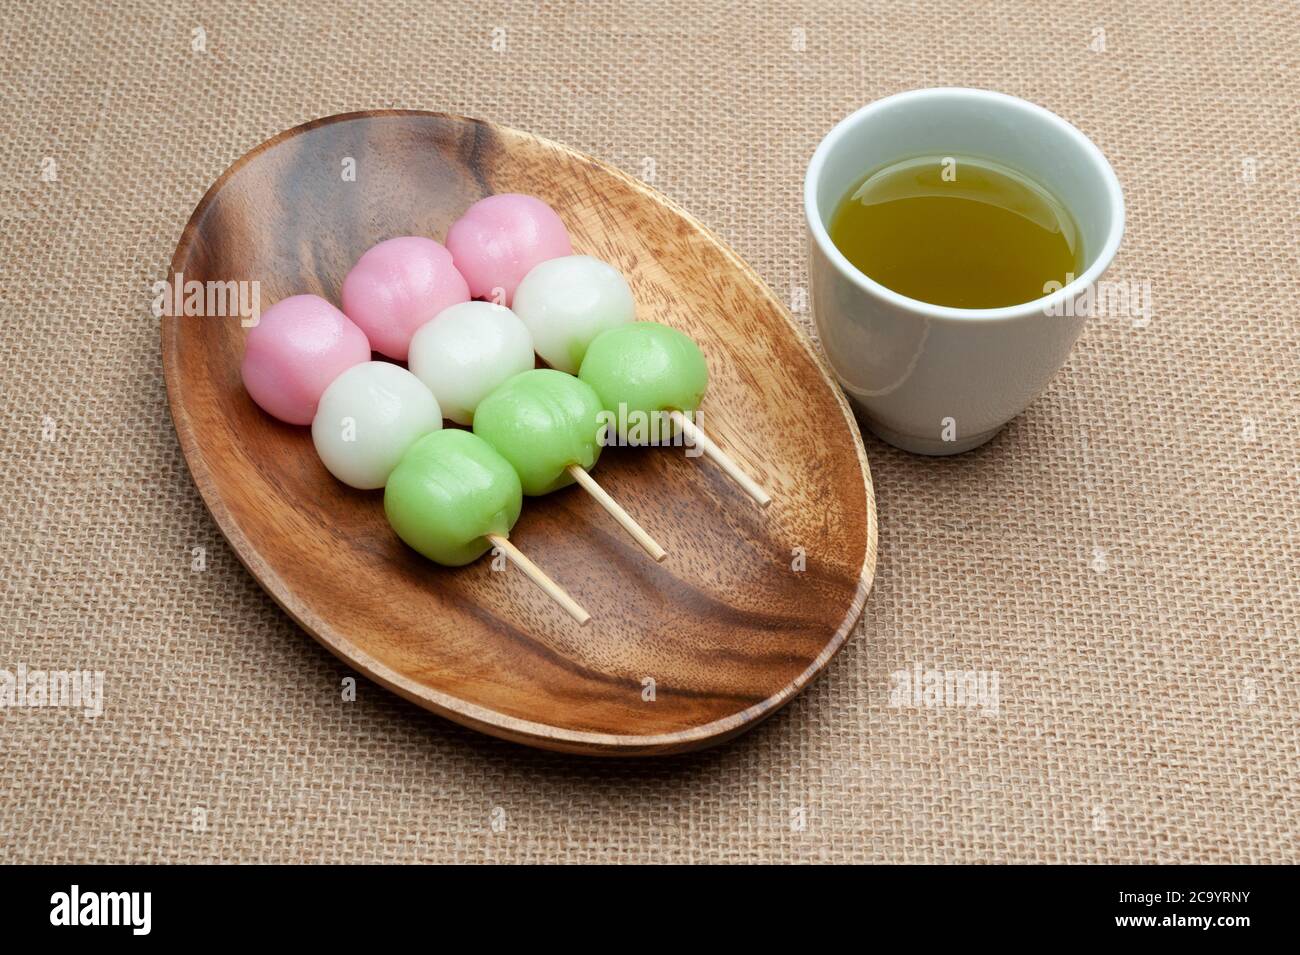 Japanese traditional sweet called Dango Mochi on wooden platter with green tea. Isolated on jute background. Close-up. Top view. Stock Photo